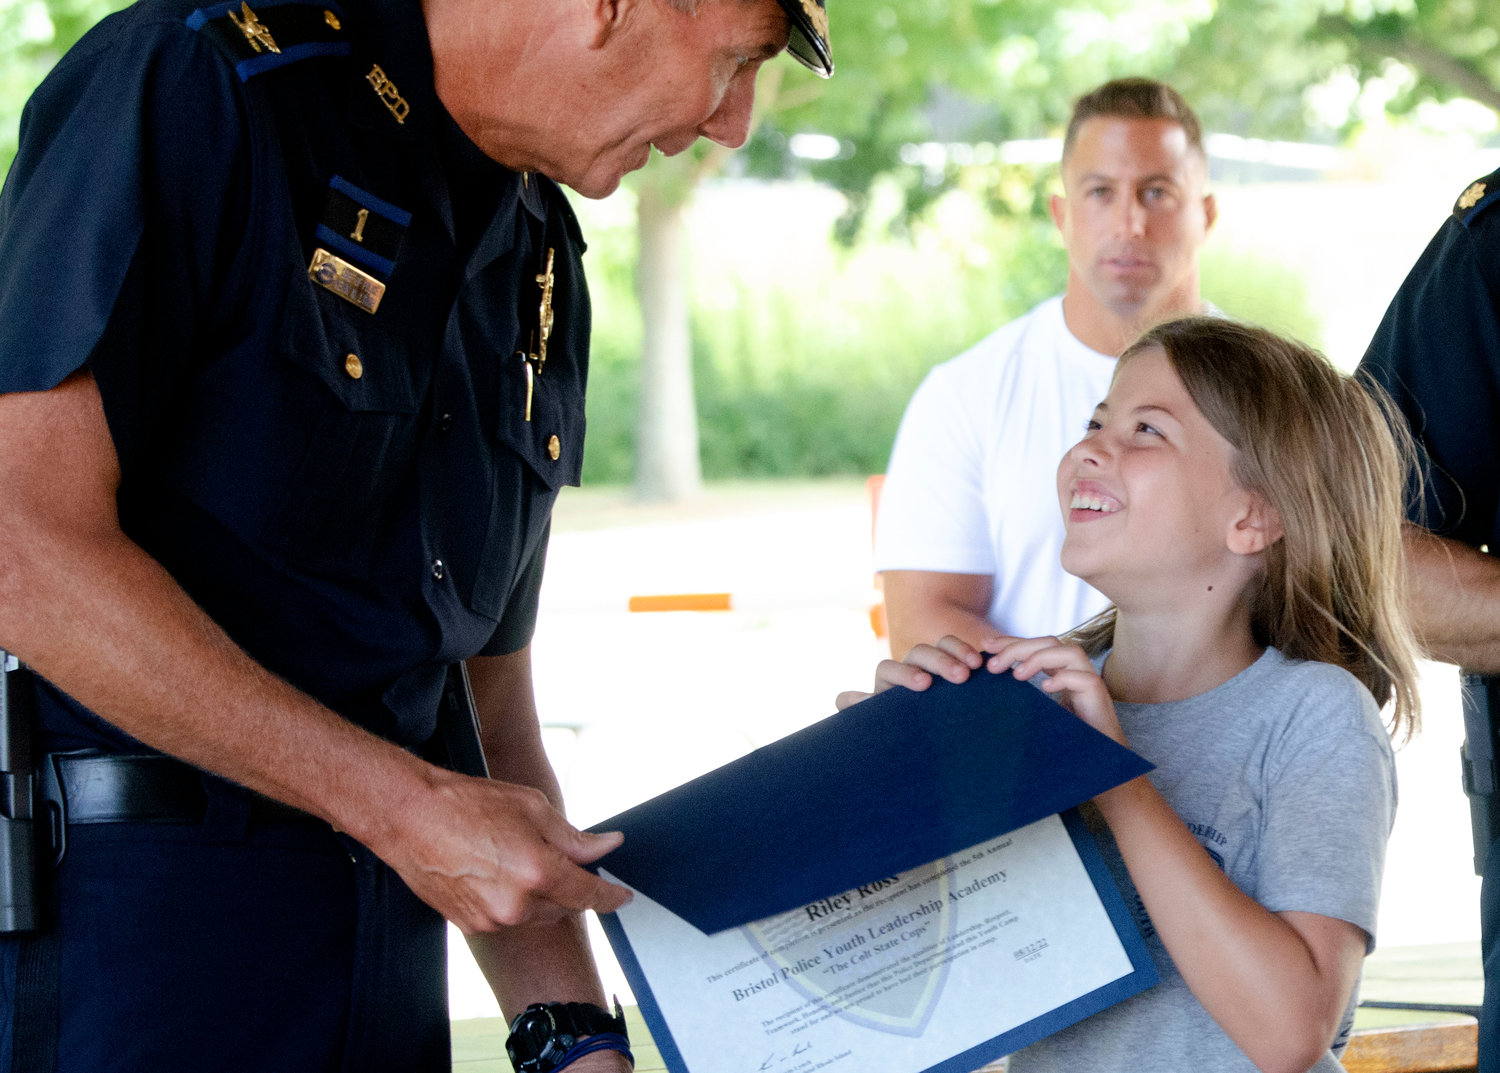 Bristol Police Chief Kevin Lynch (left) and Major Brian Burke pose with Riley Ross after she received a certificate for passing the leadership academy at the town beach on Friday.